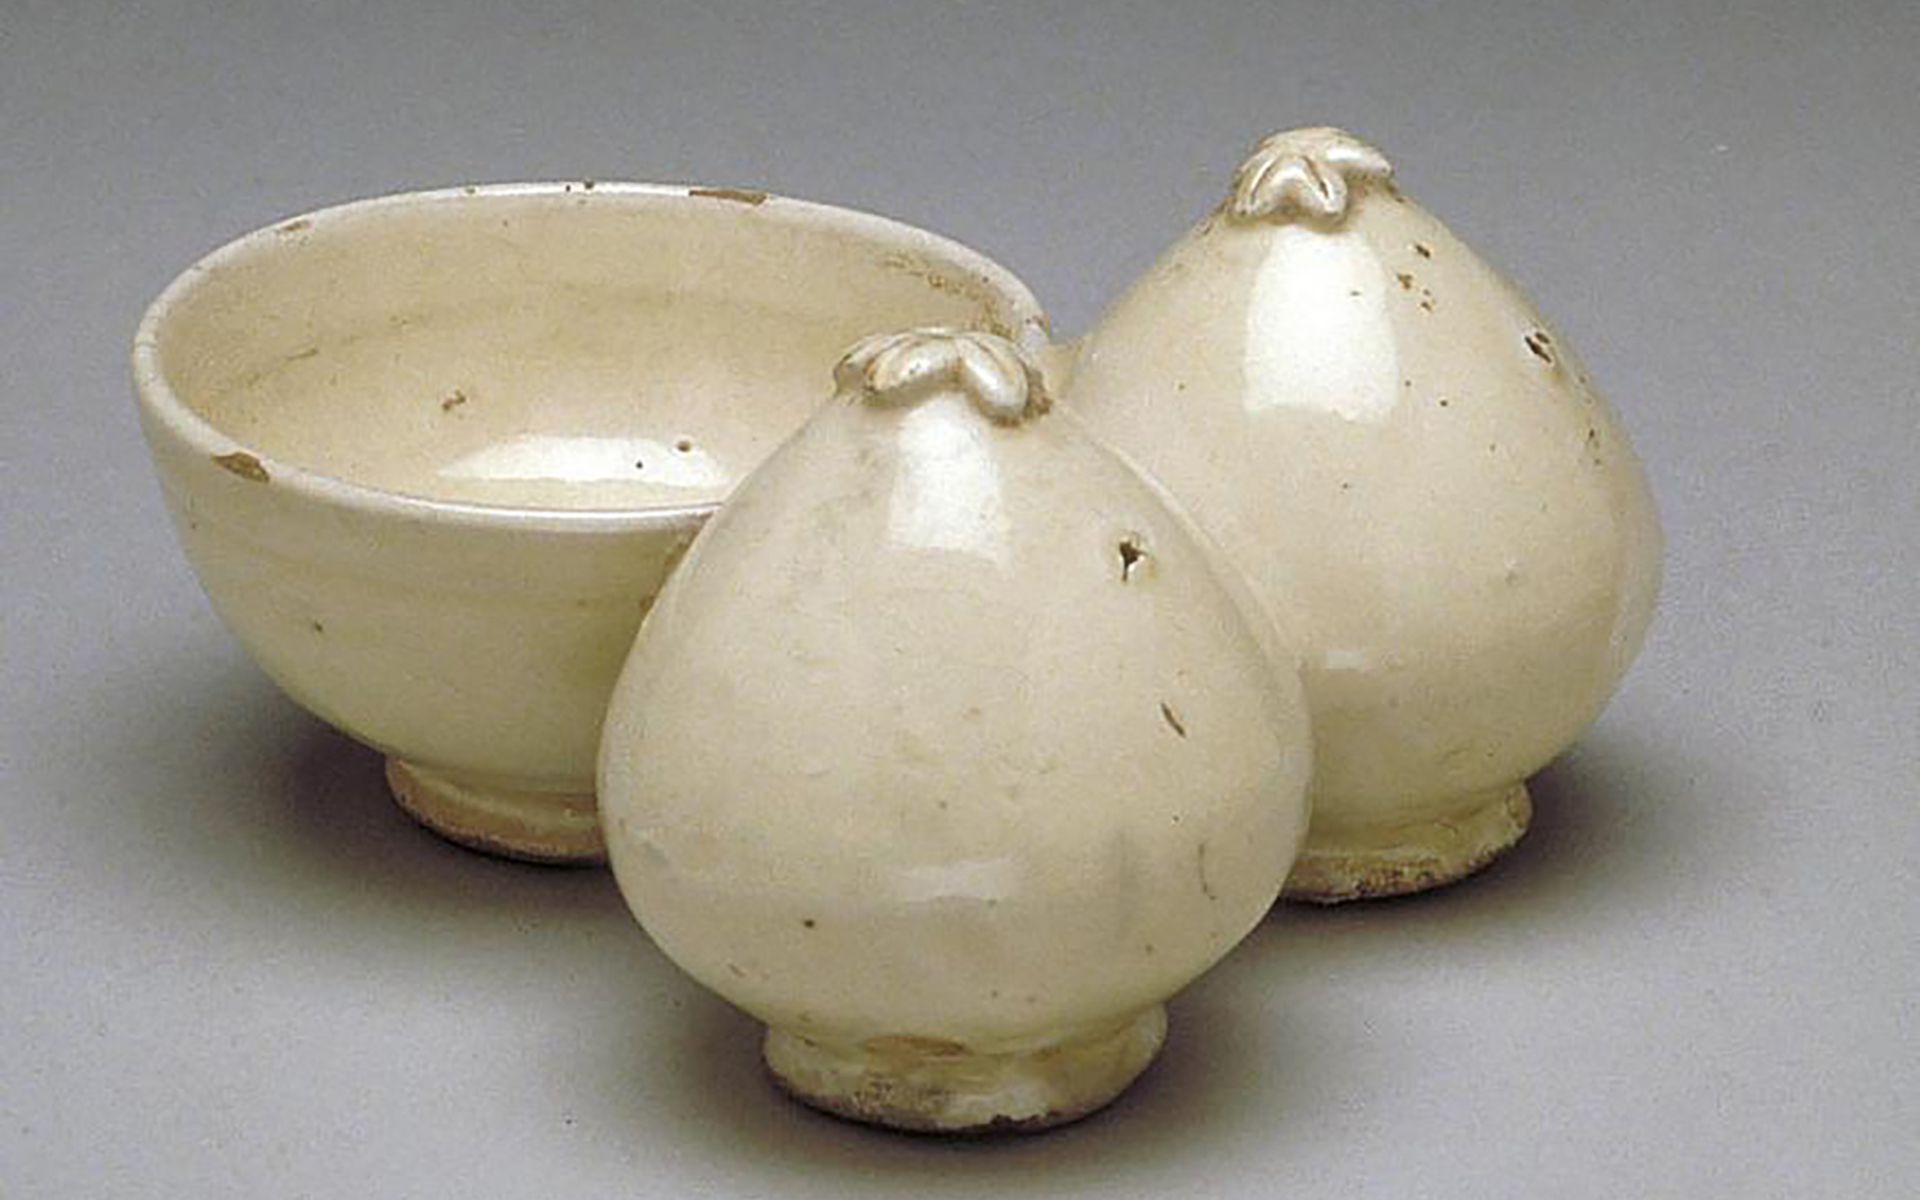 Cream colored ceramic bowl attached to two persimmon-like shapes.